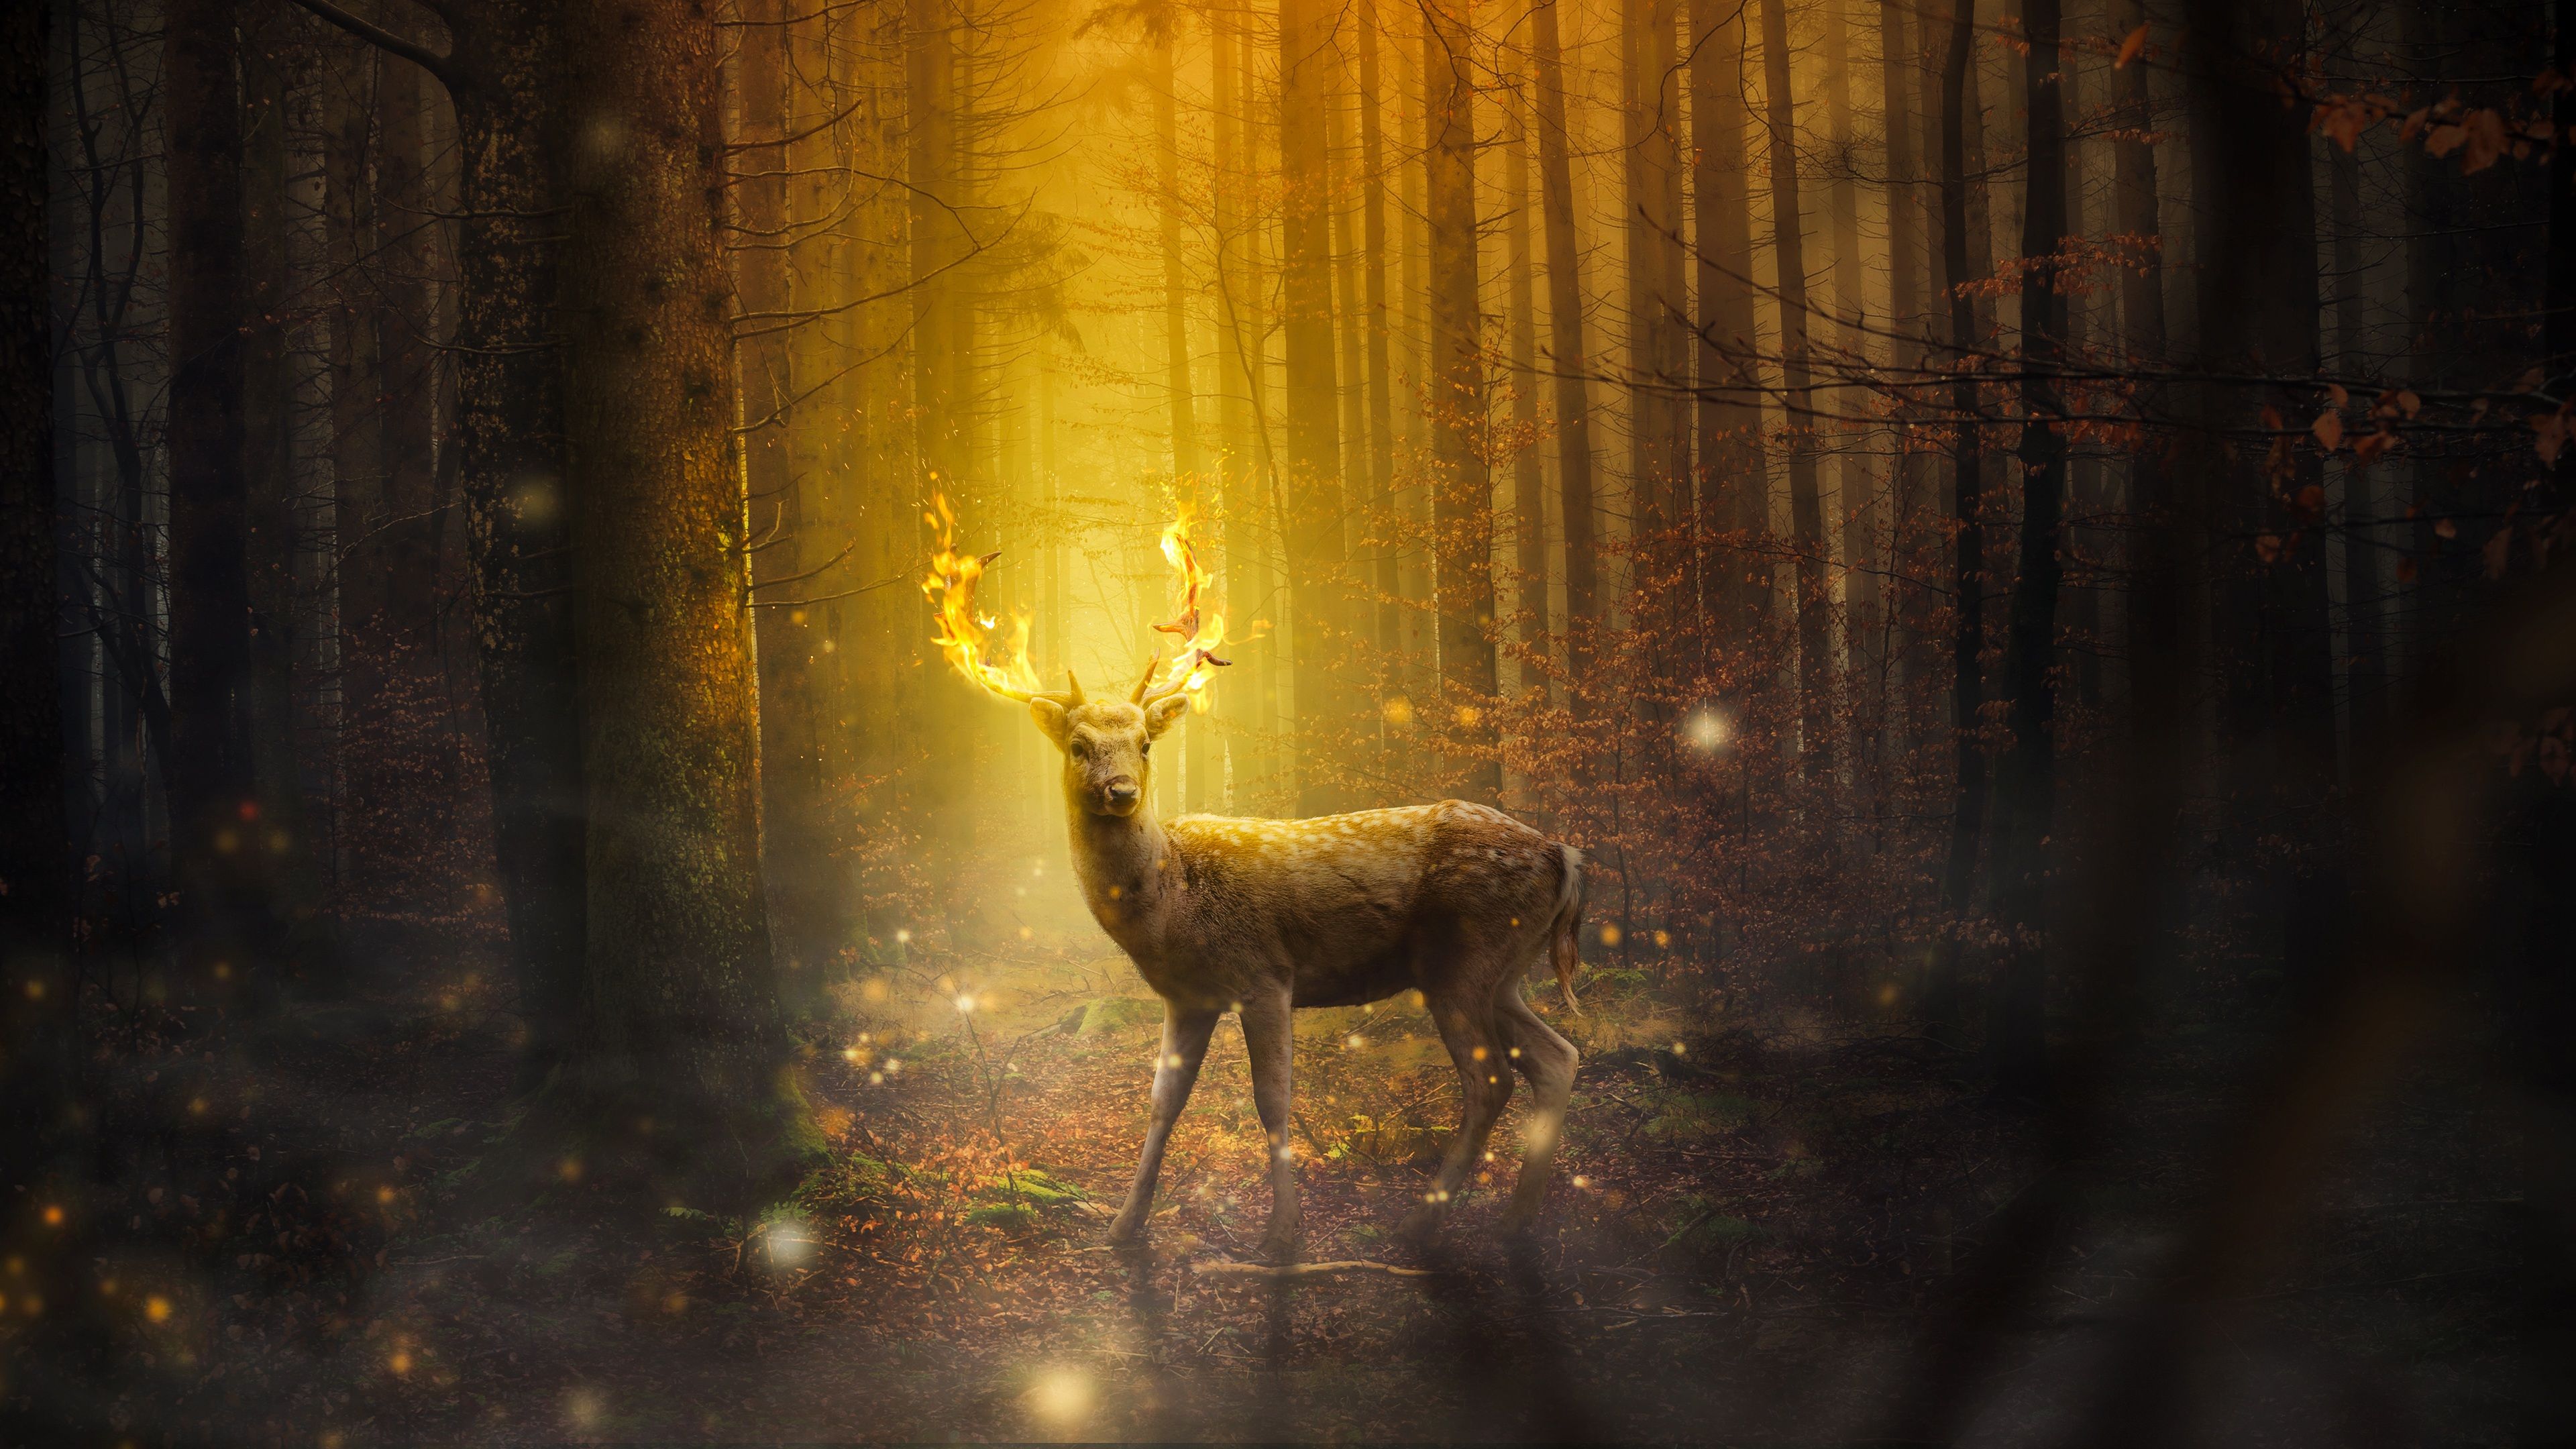 Wallpaper Deer, Fire, Forest, Autumn, 4K, Animals,. Wallpaper for iPhone, Android, Mobile and Desktop